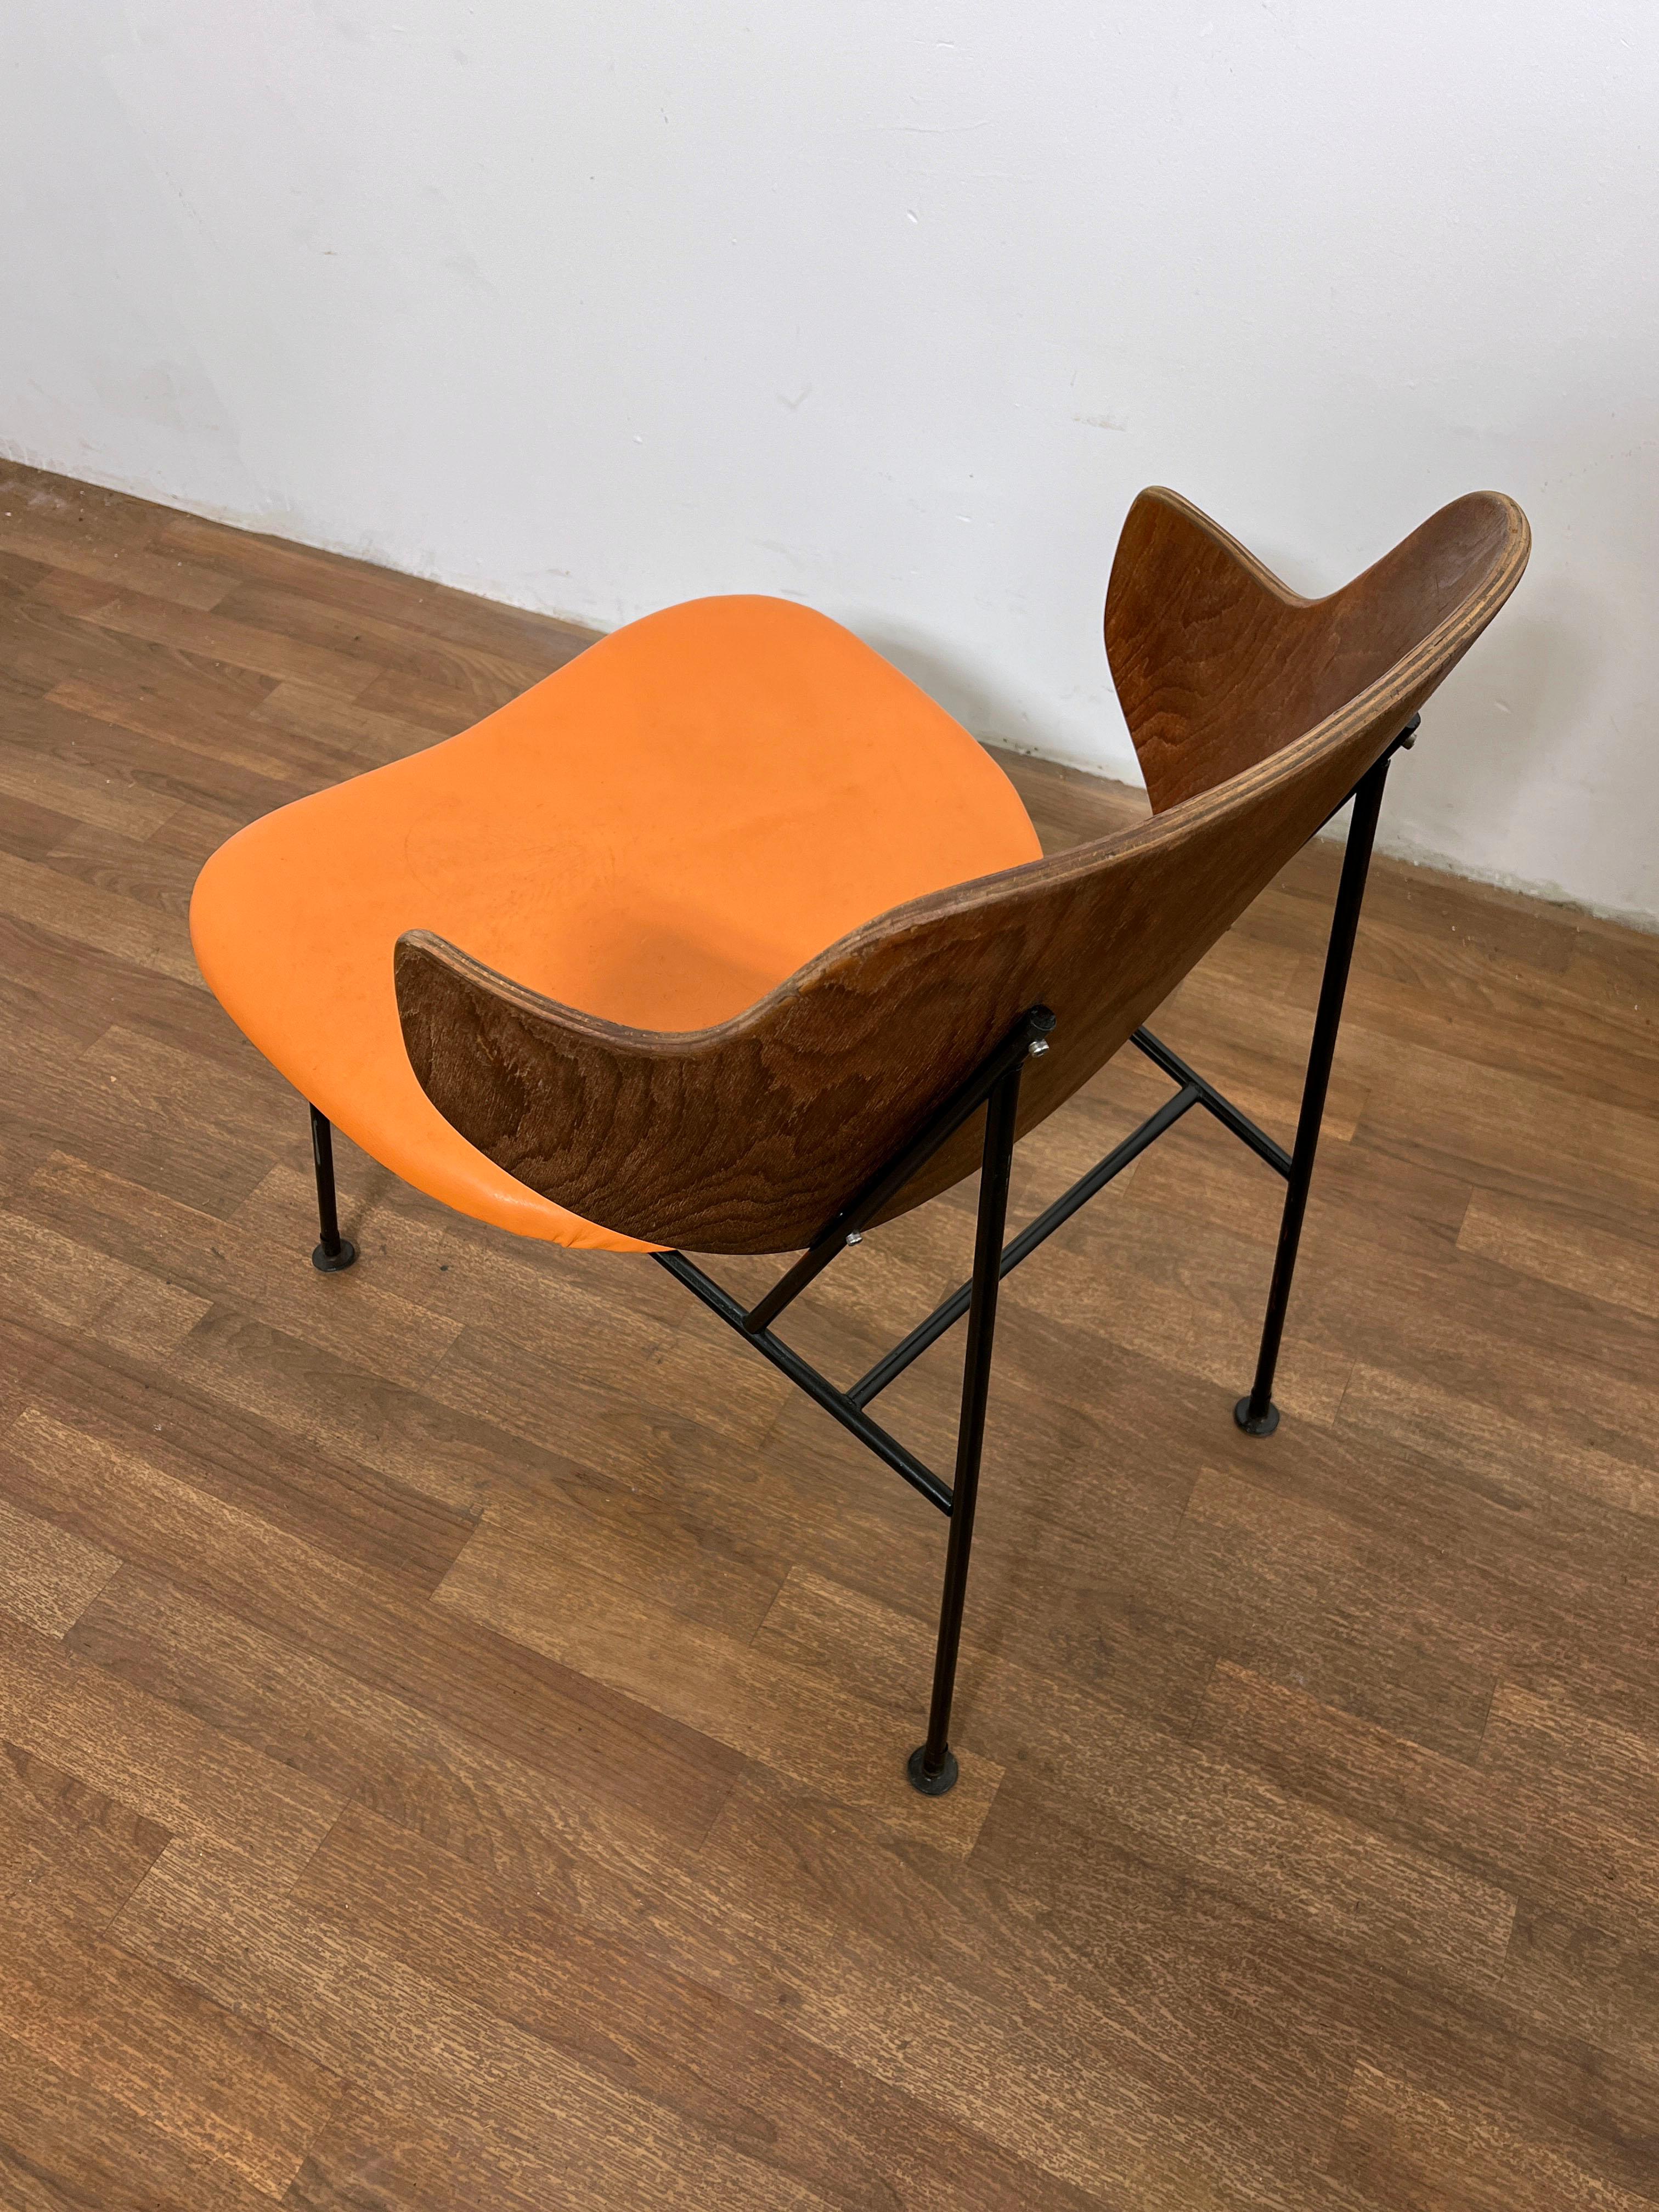 Ib Kofod-Larsen Danish Bentwood and Leather Penguin Chair Circa 1960s For Sale 1